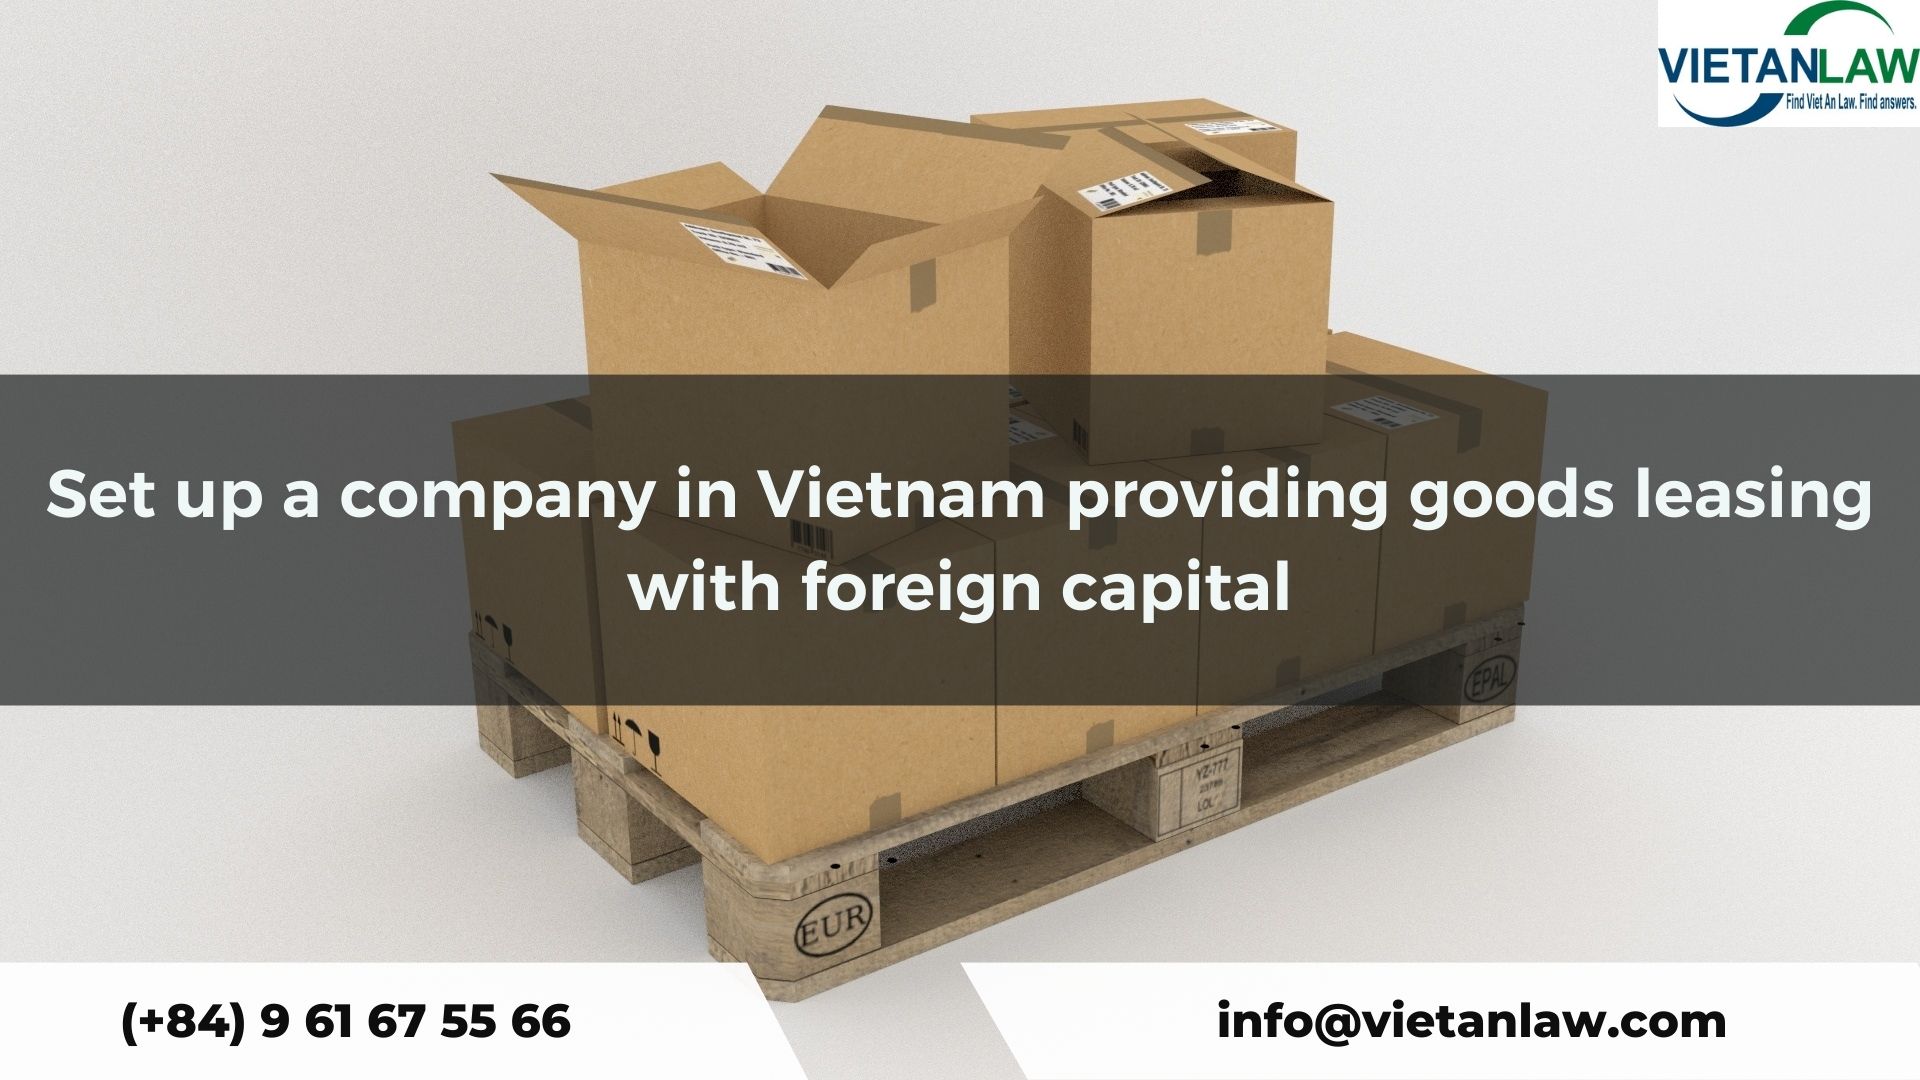 Set up a company in Vietnam providing goods leasing with foreign capital